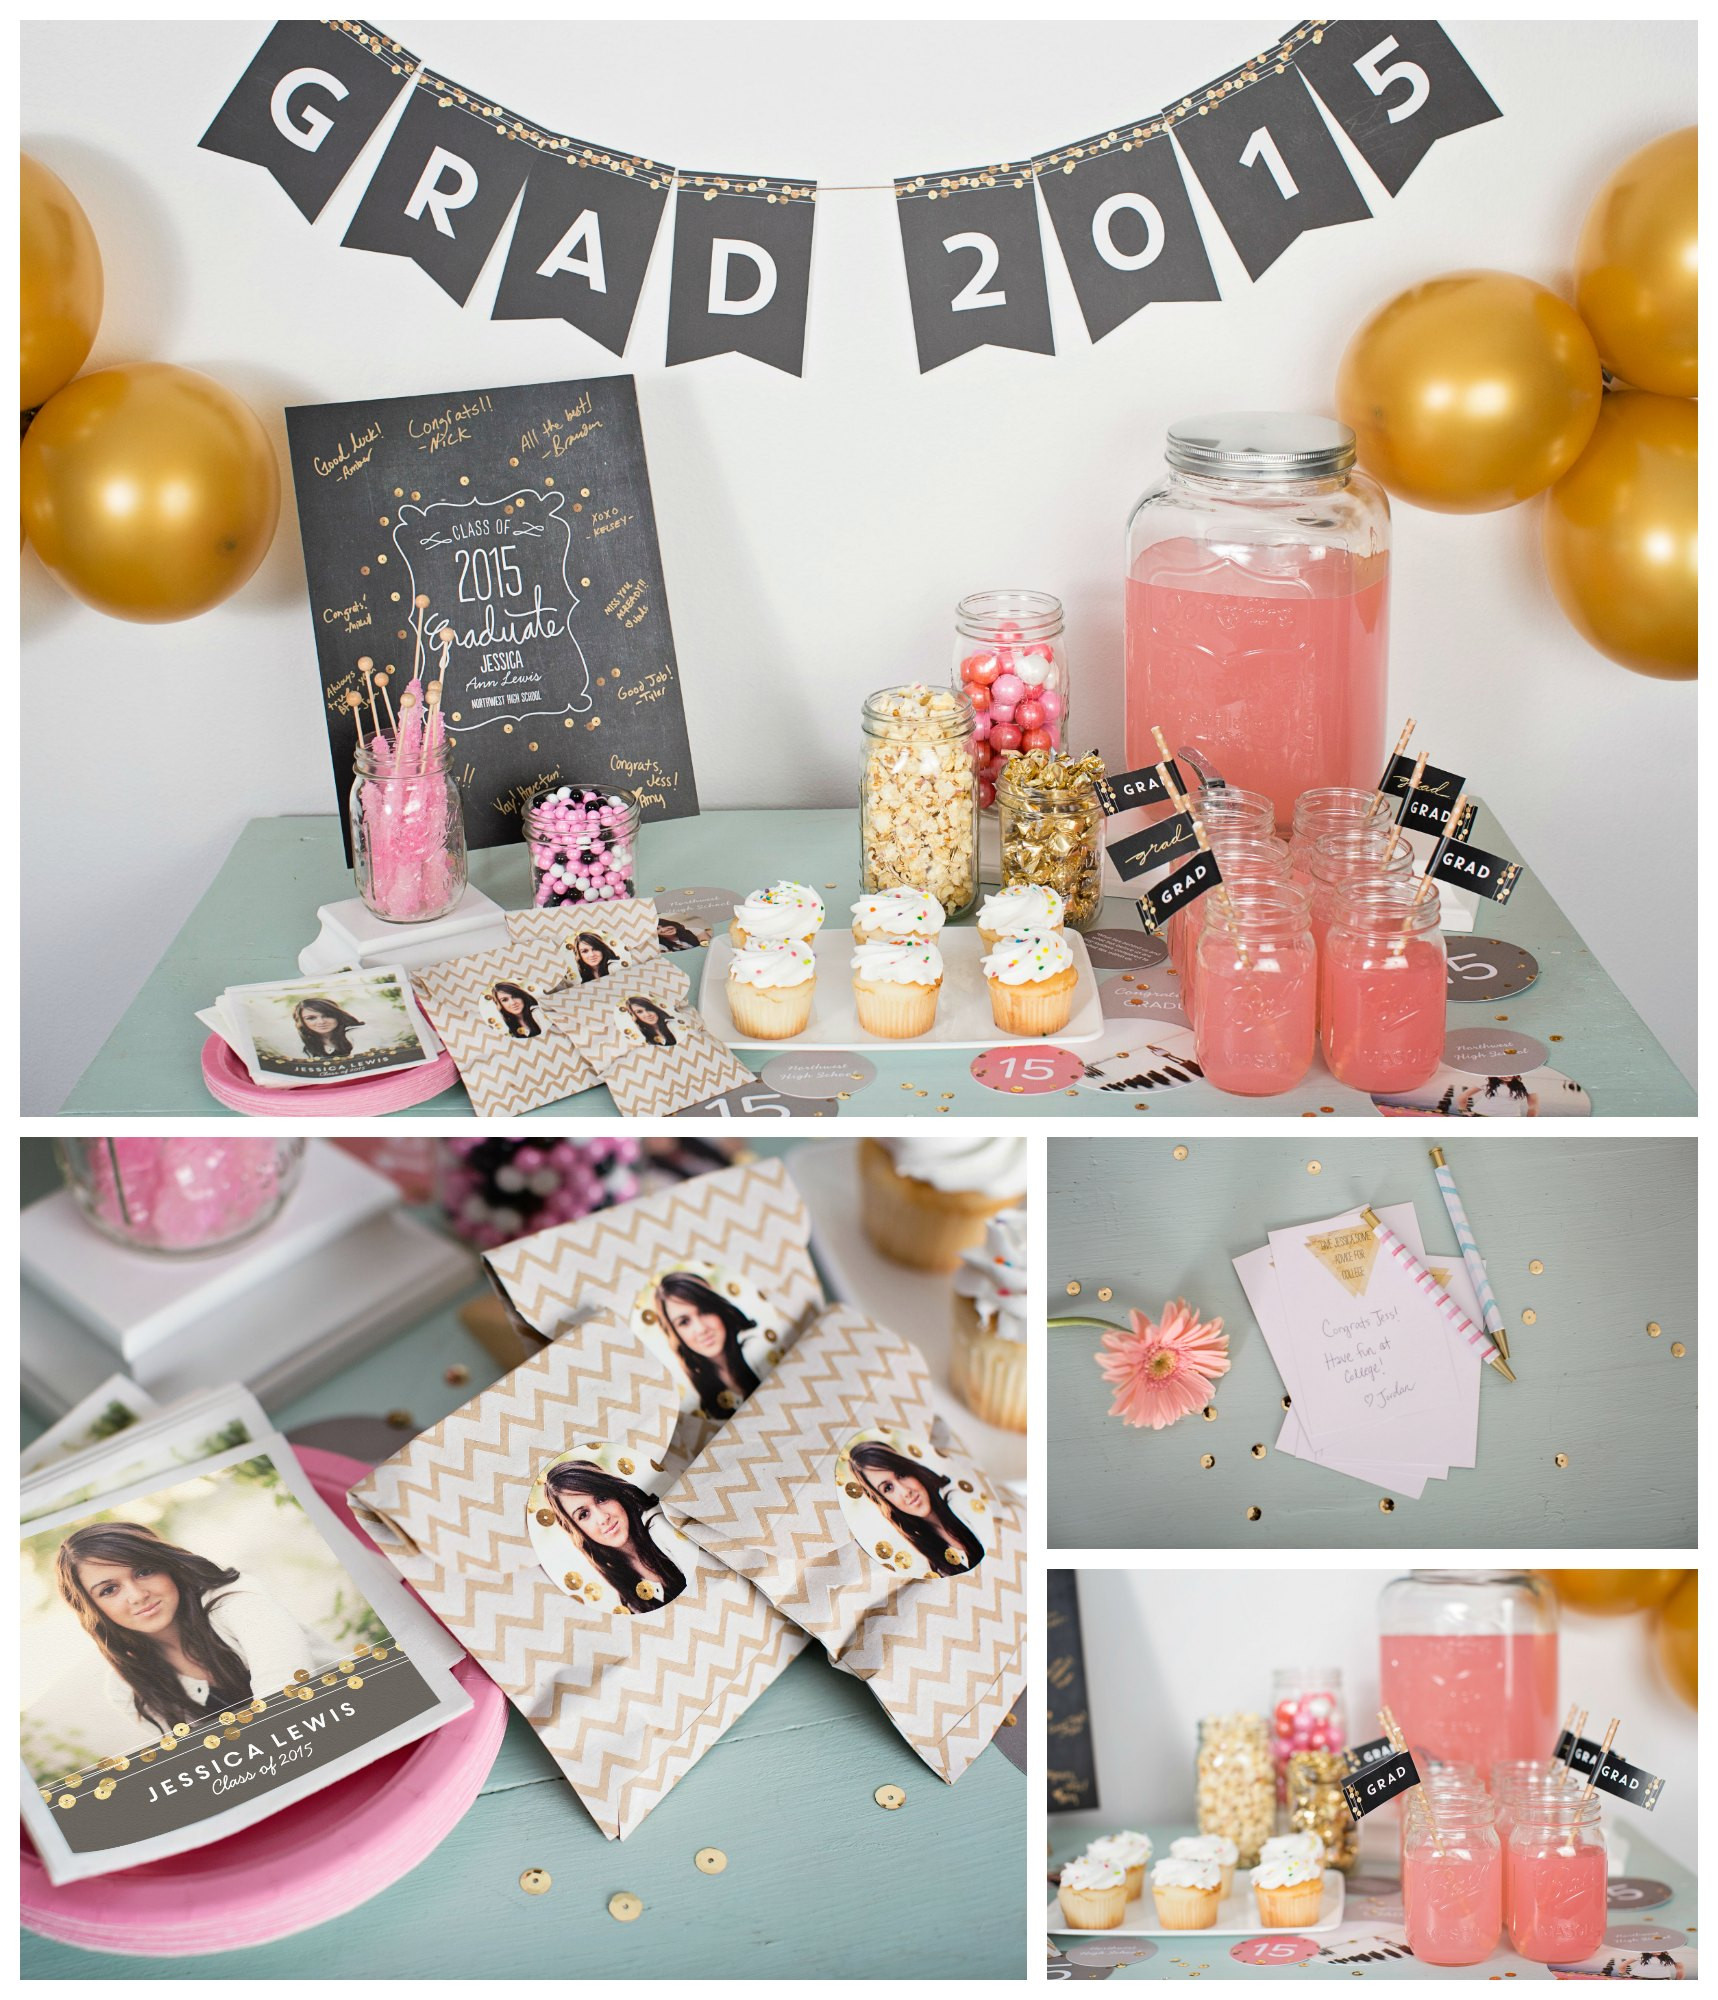 Ideas For Decorating For A Graduation Party
 Sequin Inspired Graduation Party Ideas